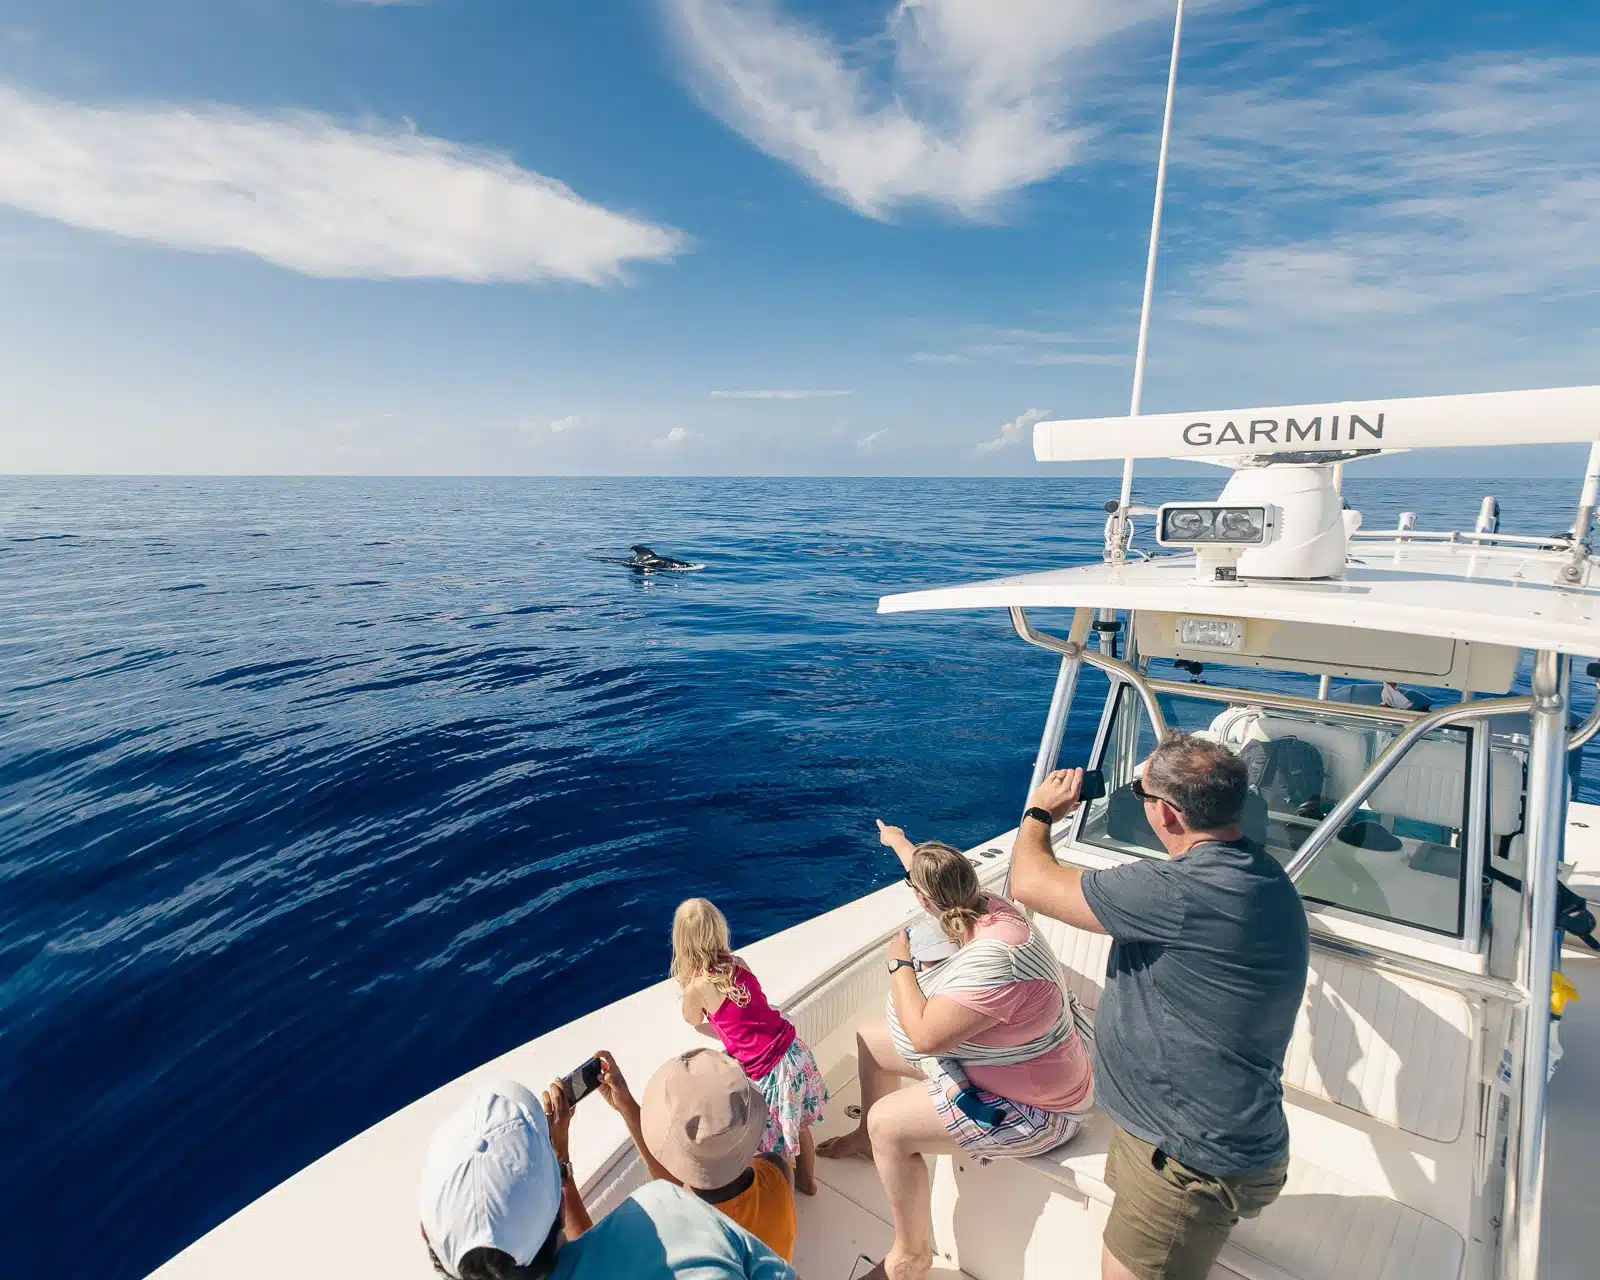 Private Dolphin/Whale Watch is a Water Activity located in the city of Kailua-Kona on Big Island, Hawaii